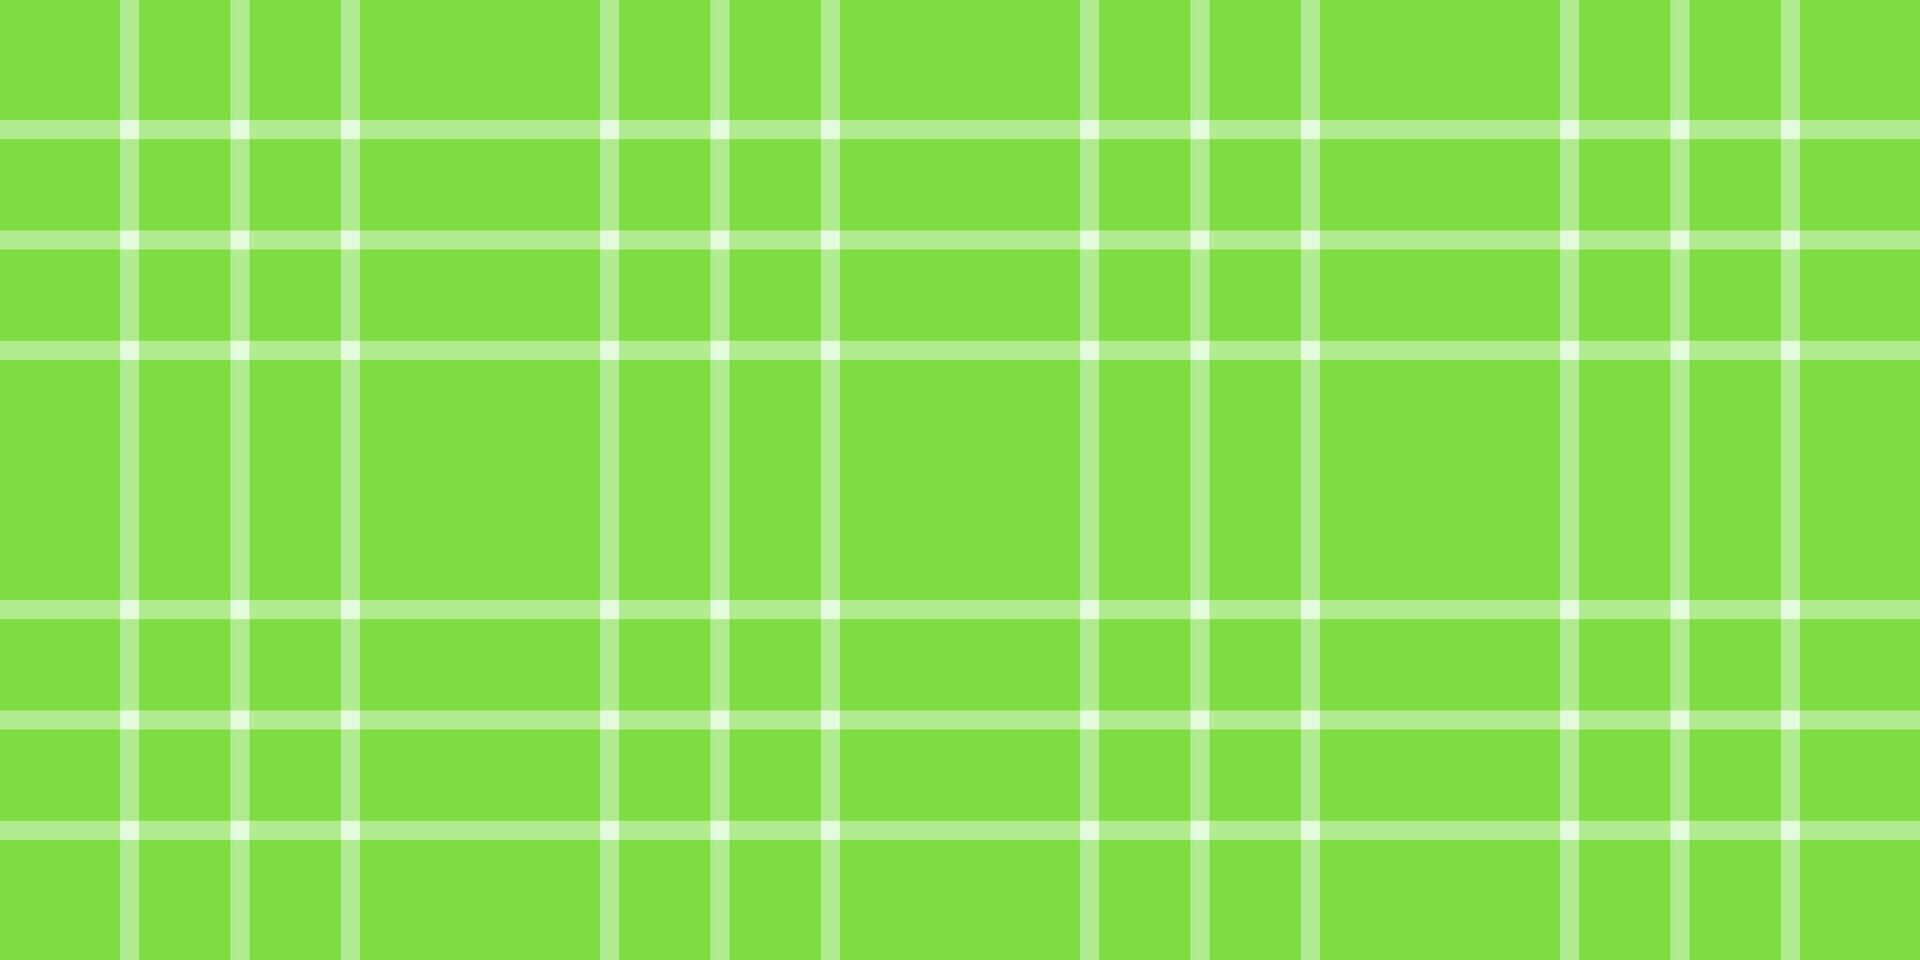 Sale check plaid, 70s pattern background fabric. Graph tartan textile texture seamless in green and light colors. vector